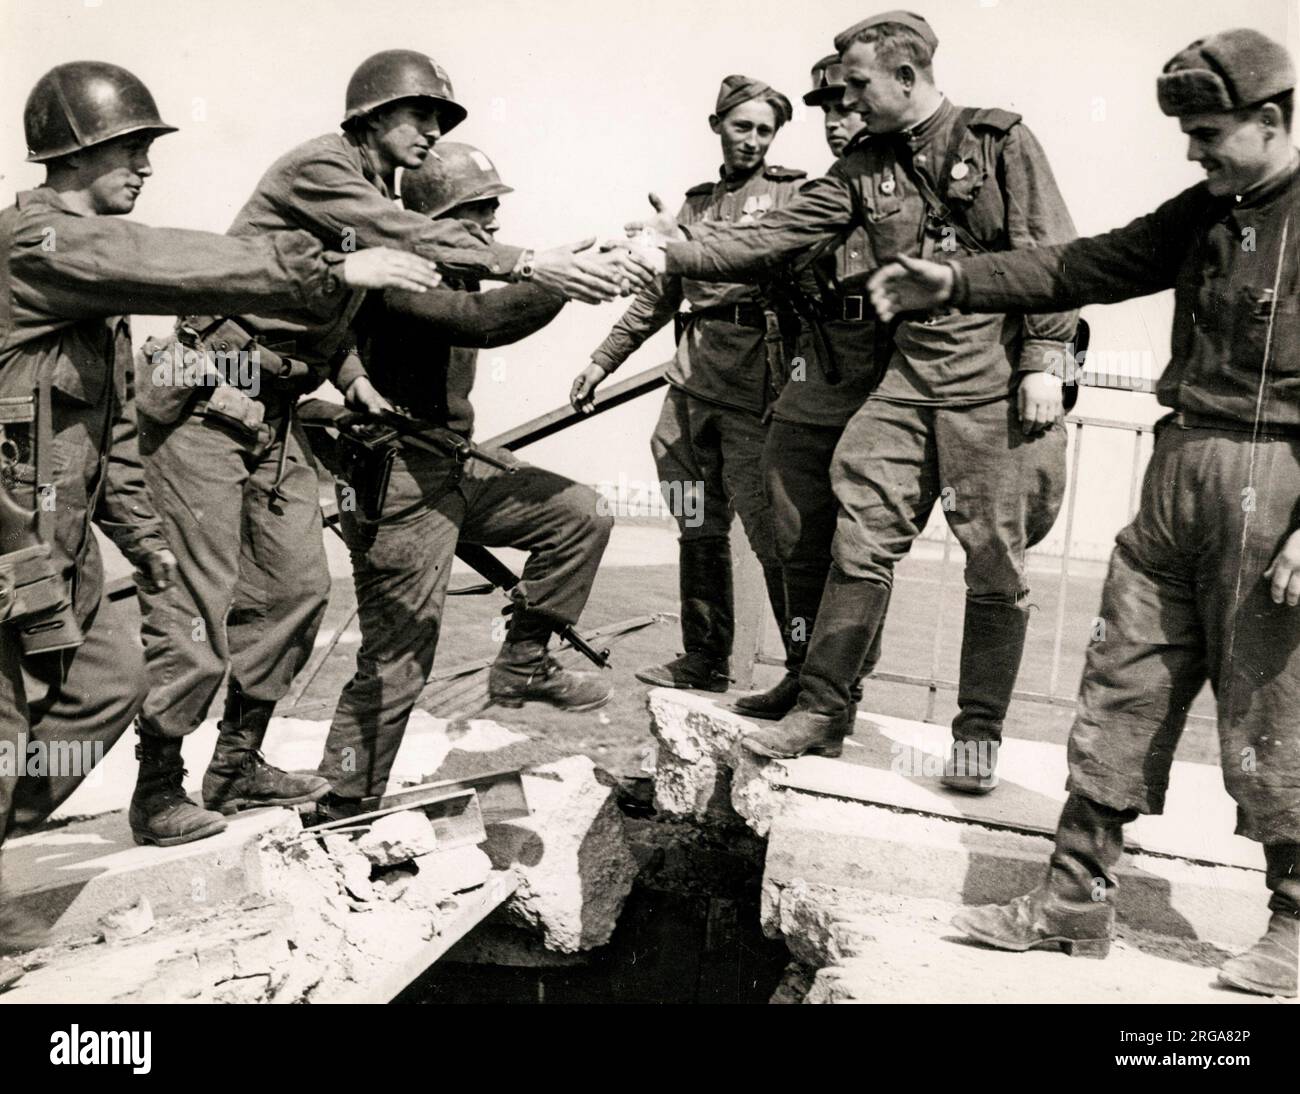 American soldiers of the First Army shake hands with Russian counterparts as the two sides meet at Torgau on the River Elbe, 1945 World War II Stock Photo